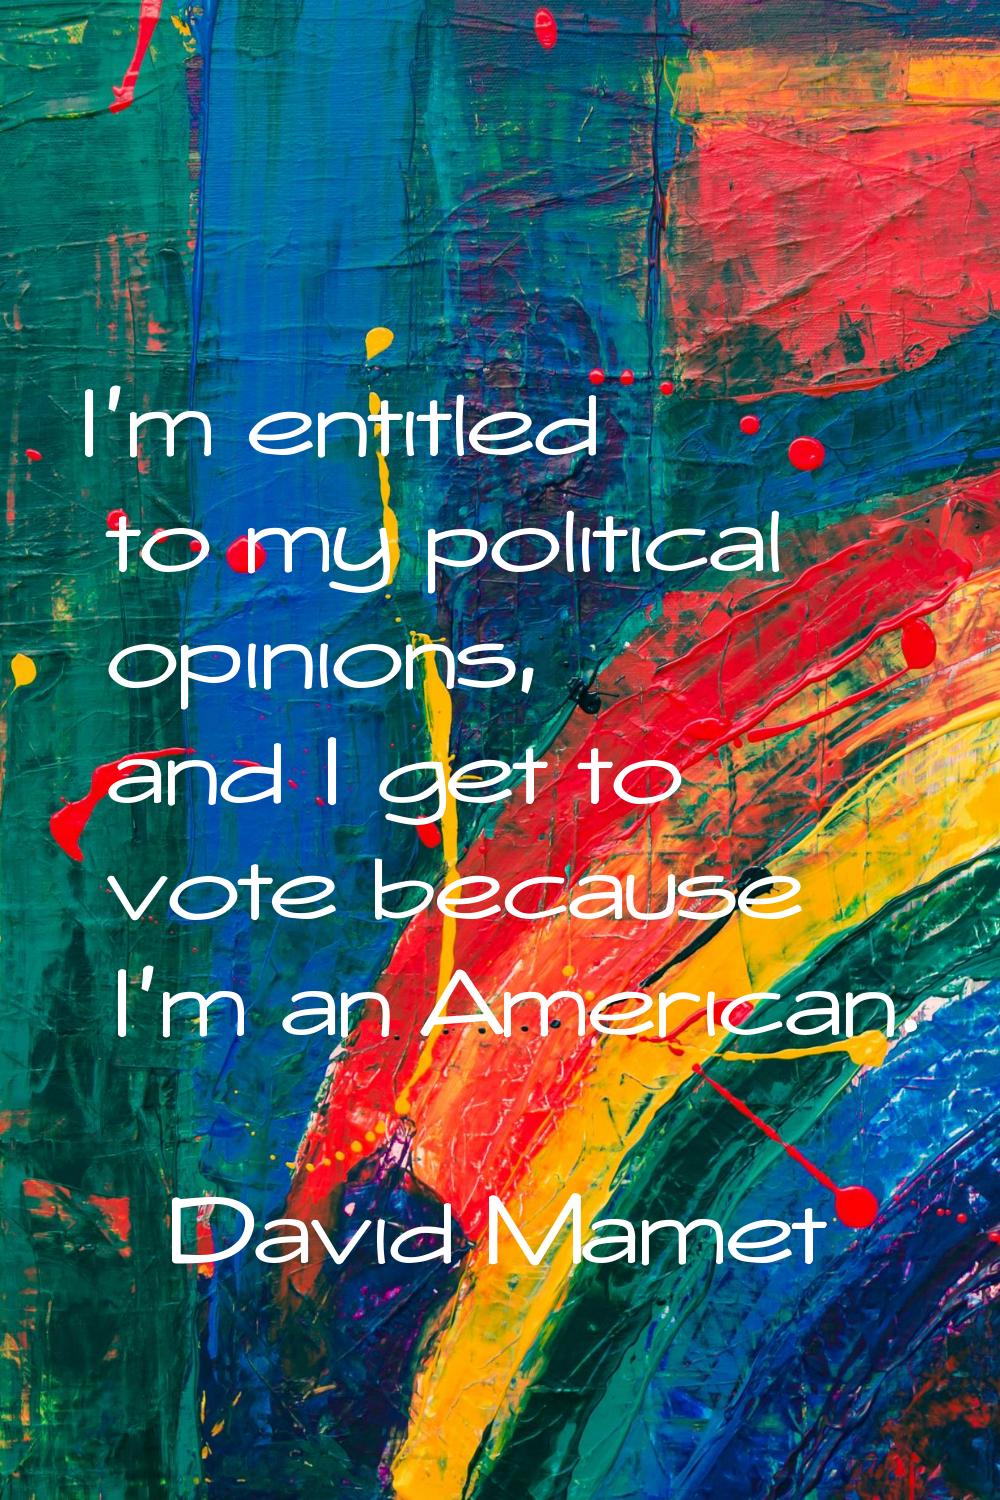 I'm entitled to my political opinions, and I get to vote because I'm an American.